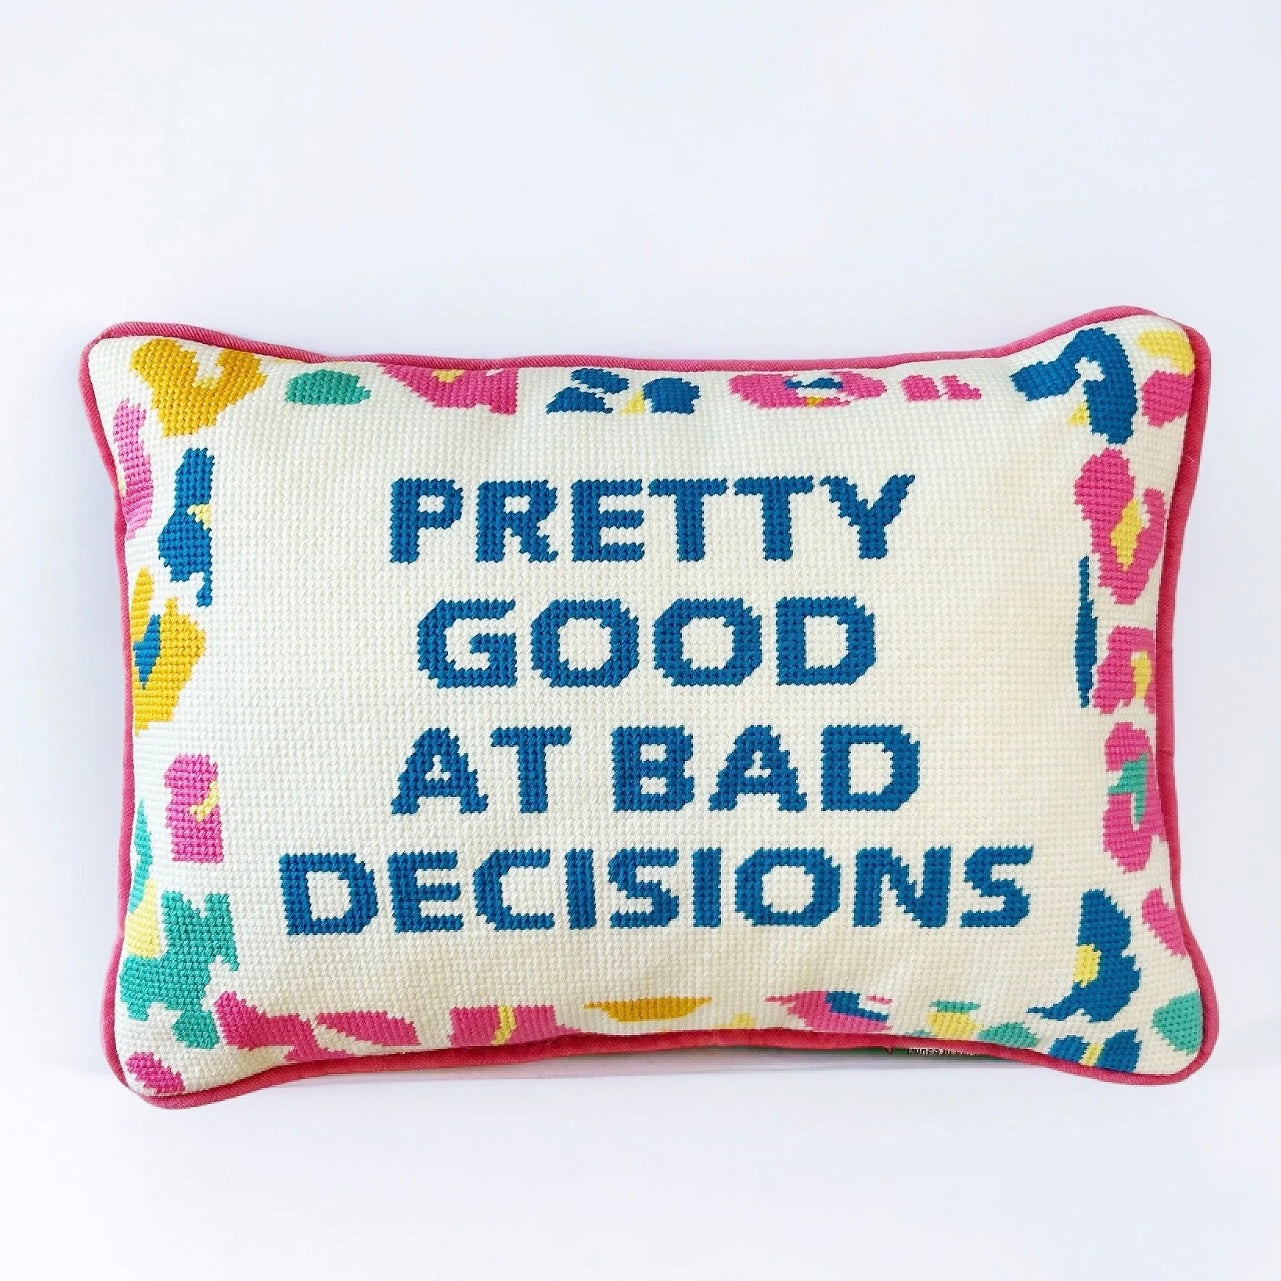 Pretty Good At Bed Decisions Pillow